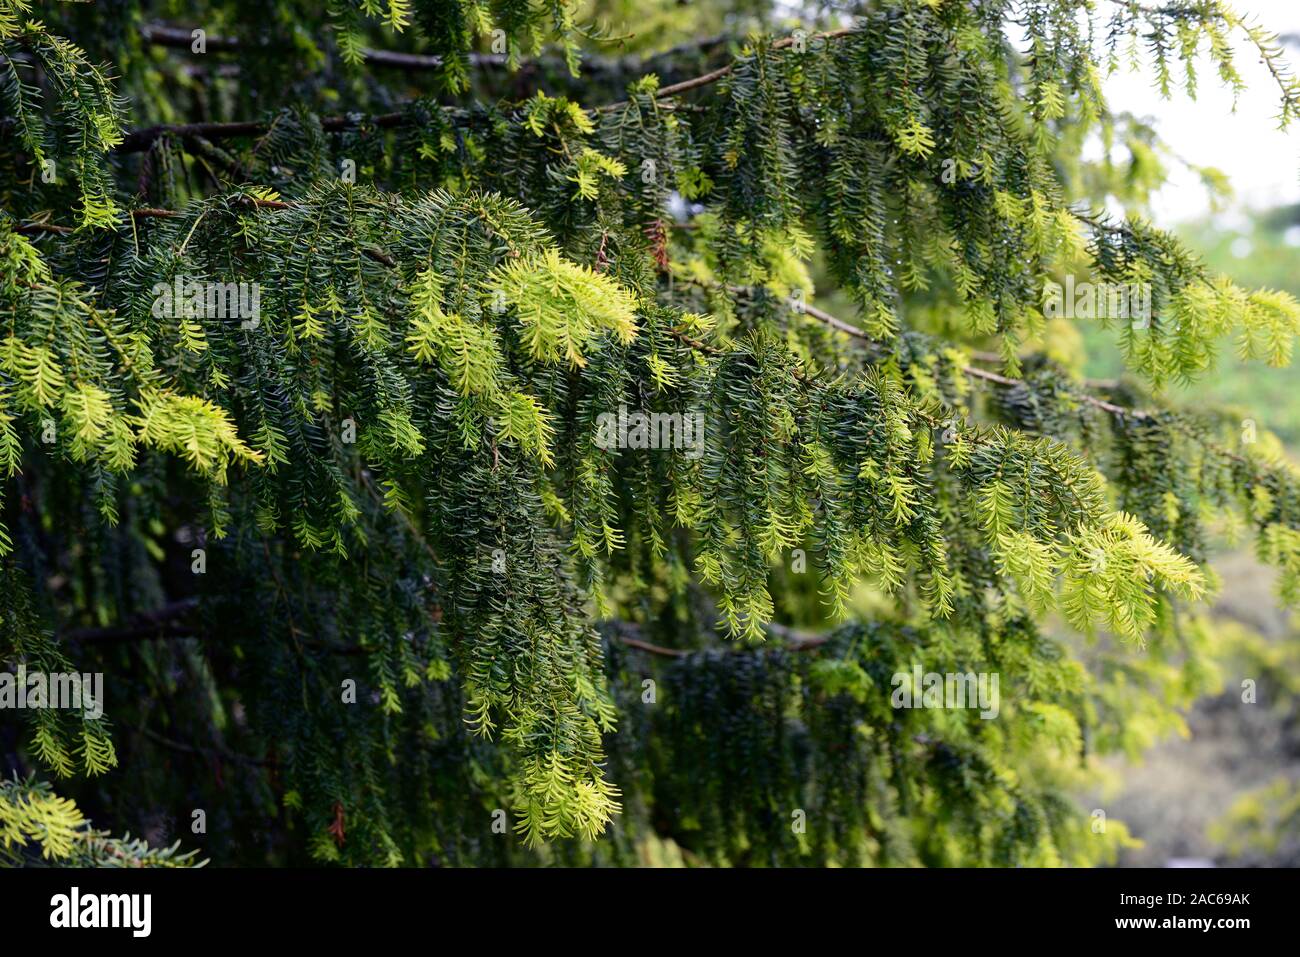 Taxus baccata Dovastonii Aurea,golden Dovaston's yew,new growth,yellow golden tips,evergreen,evergreens,RM Floral Stock Photo